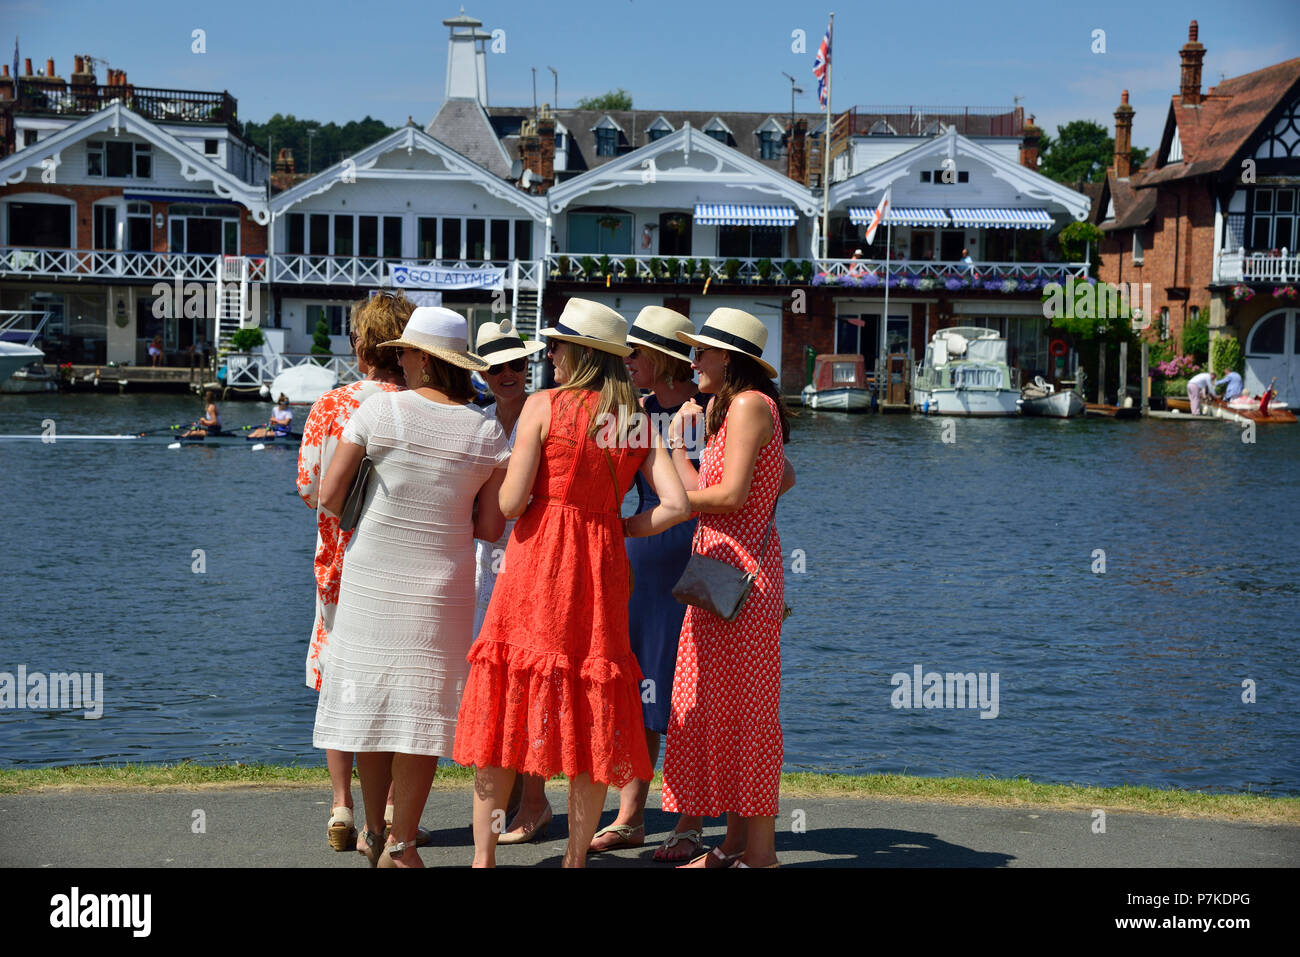 Henley Royal Regatta, Henley-on-Thames, UK. 6th July 2018. The third day of the Henley Royal Regatta took place on a stunning day in the Thames Valley.  Friends of the crew stand on the banks of the River Thames waiting for them to complete their race.Credit Wendy Johnson/Alamy Live News Stock Photo